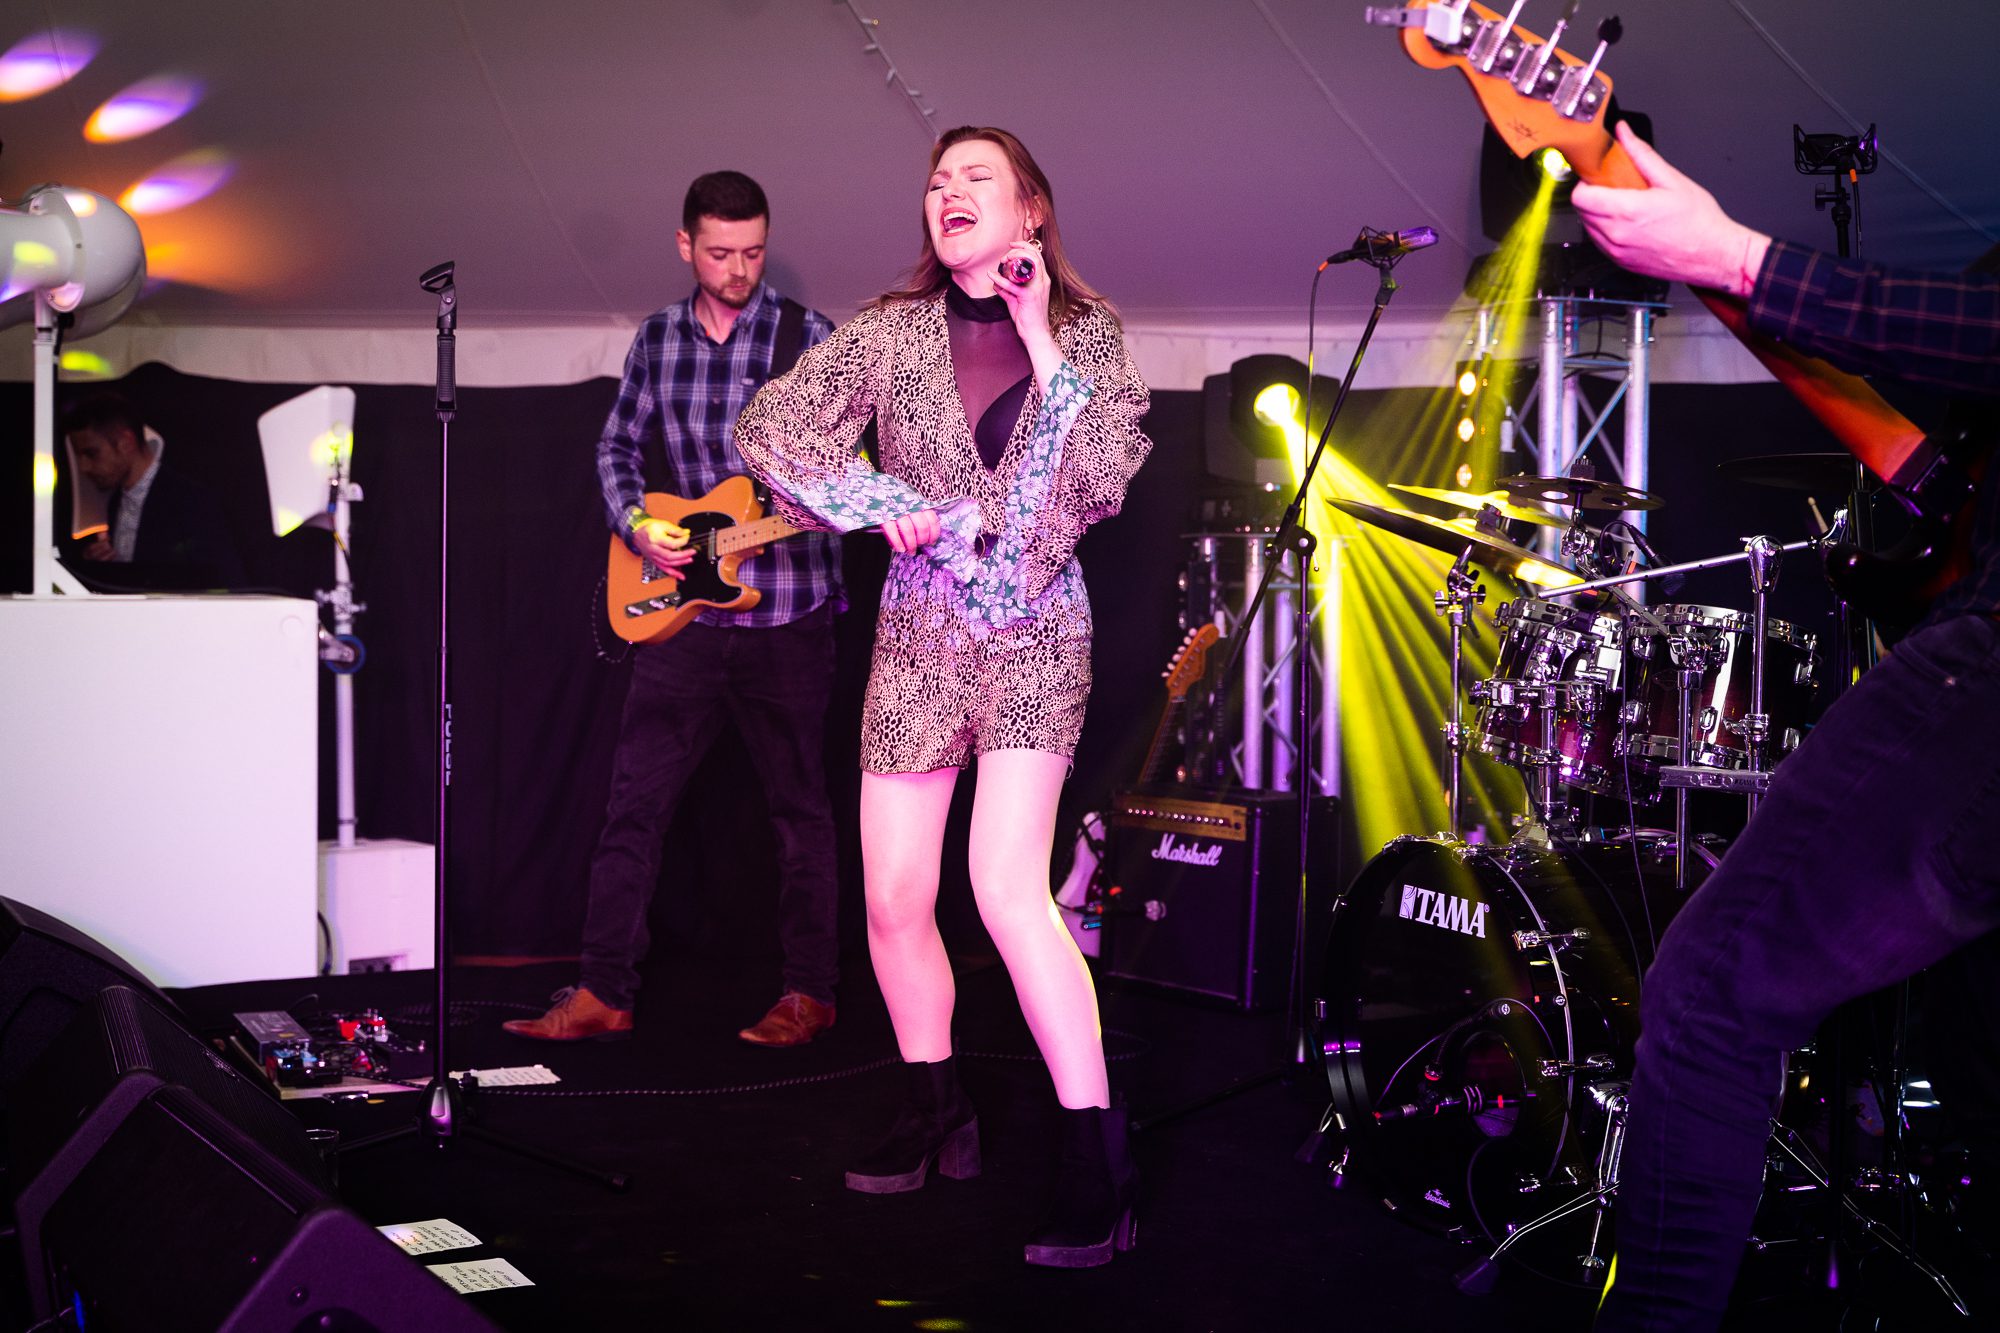 Emma And The Idles perform at a wedding party.